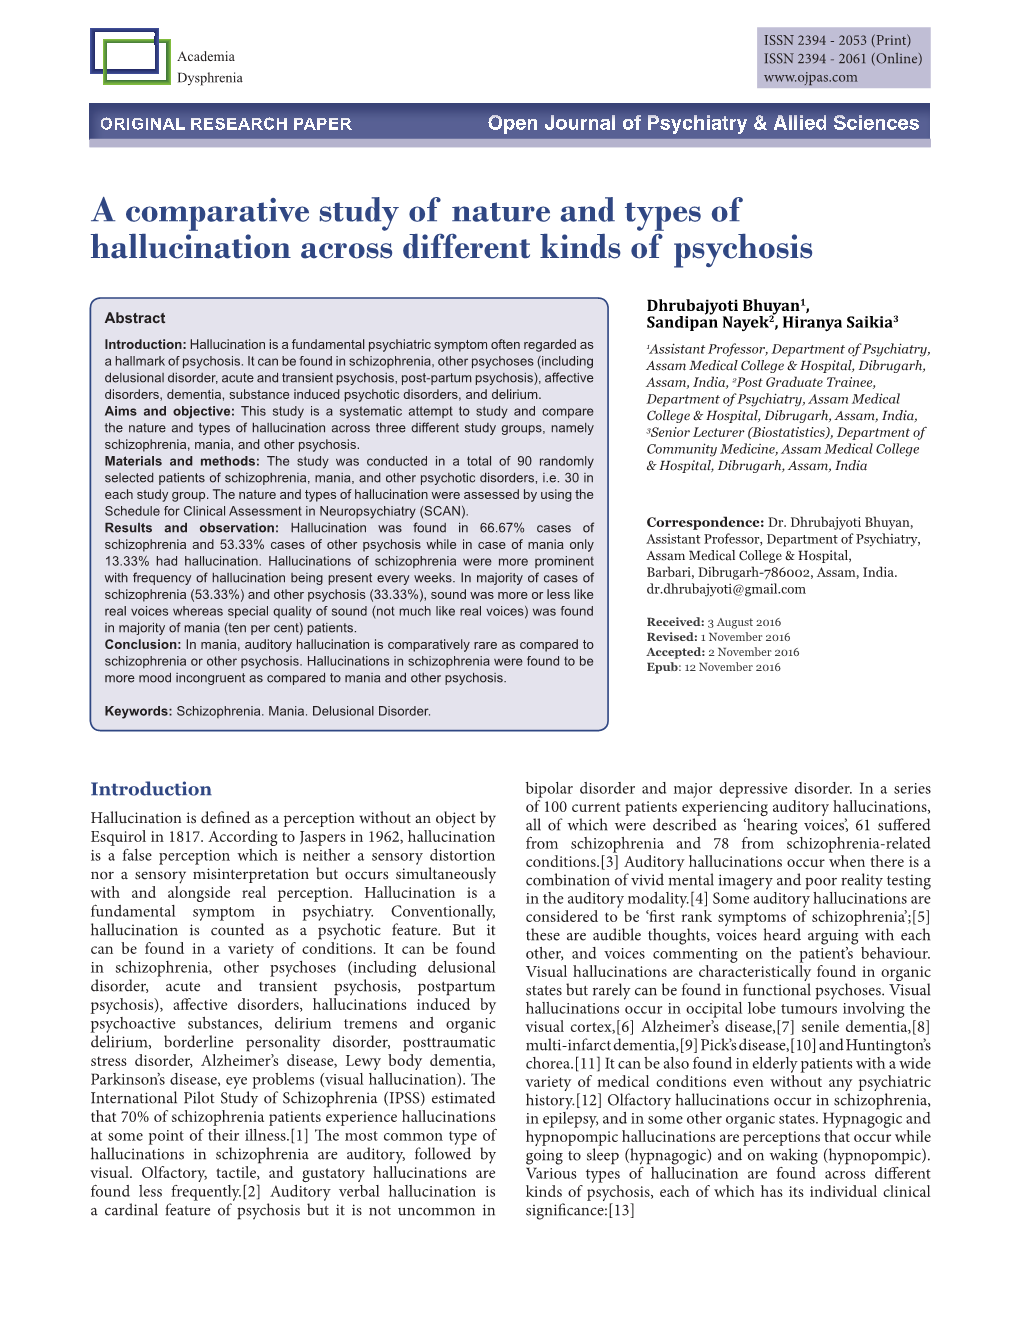 A Comparative Study of Nature and Types of Hallucination Across Different Kinds of Psychosis